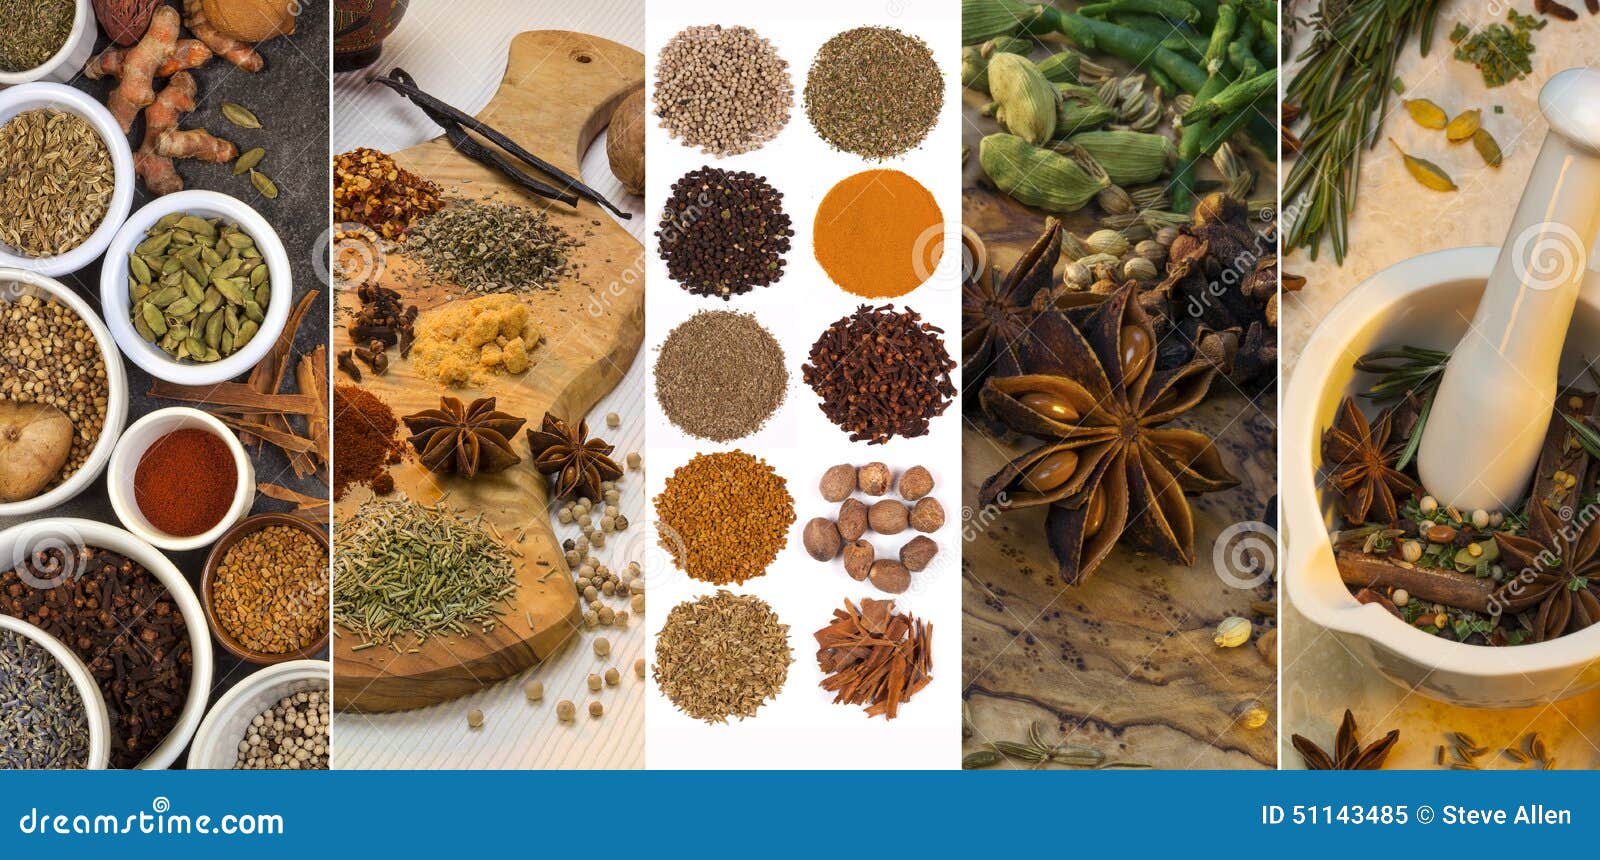 cooking spices - flavoring and seasoning